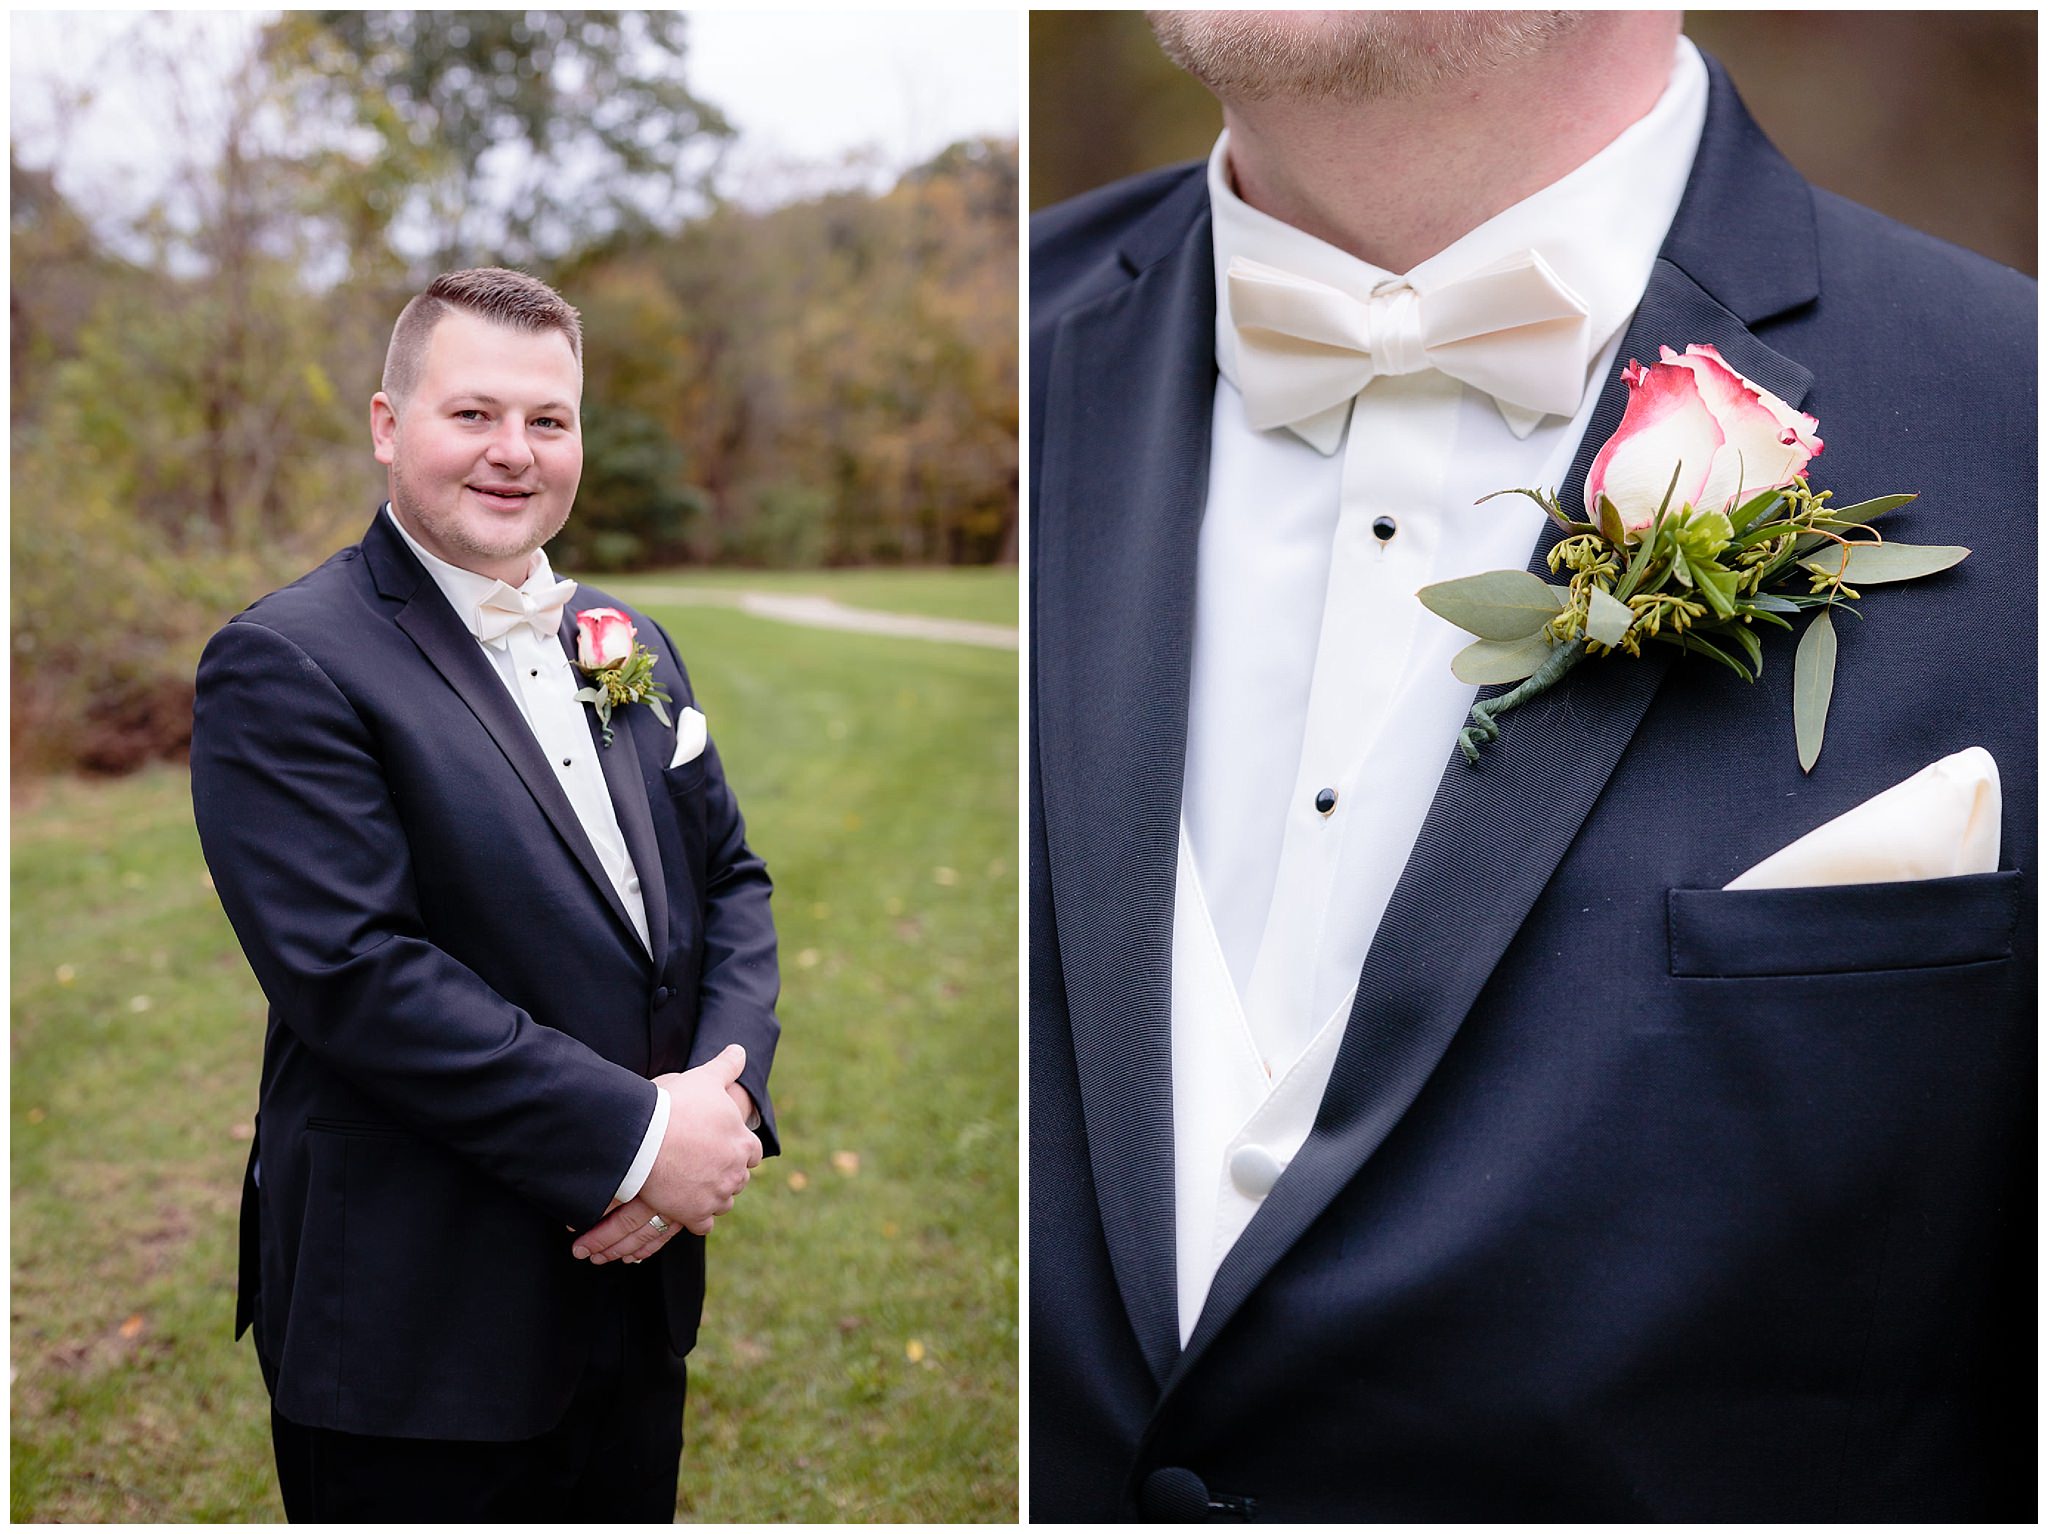 Groom wears a Vera Wang tuxedo from Men's Wearhouse and a boutonniere by Angels Floral & Gifts